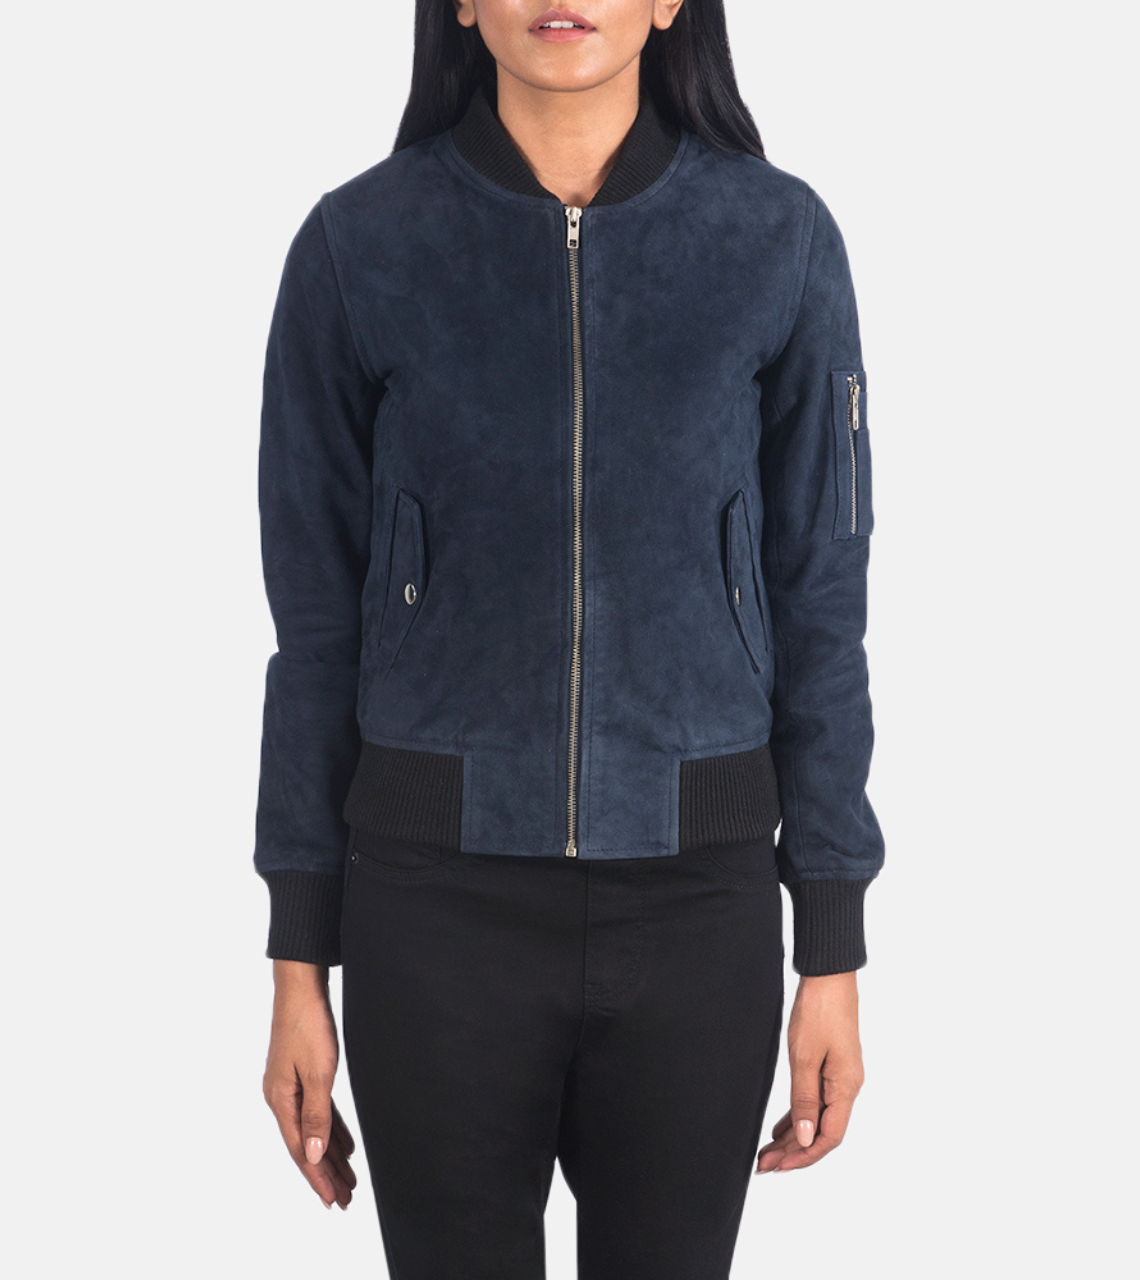 Kinthrin Women's Sapphire Bomber Suede Leather Jacket